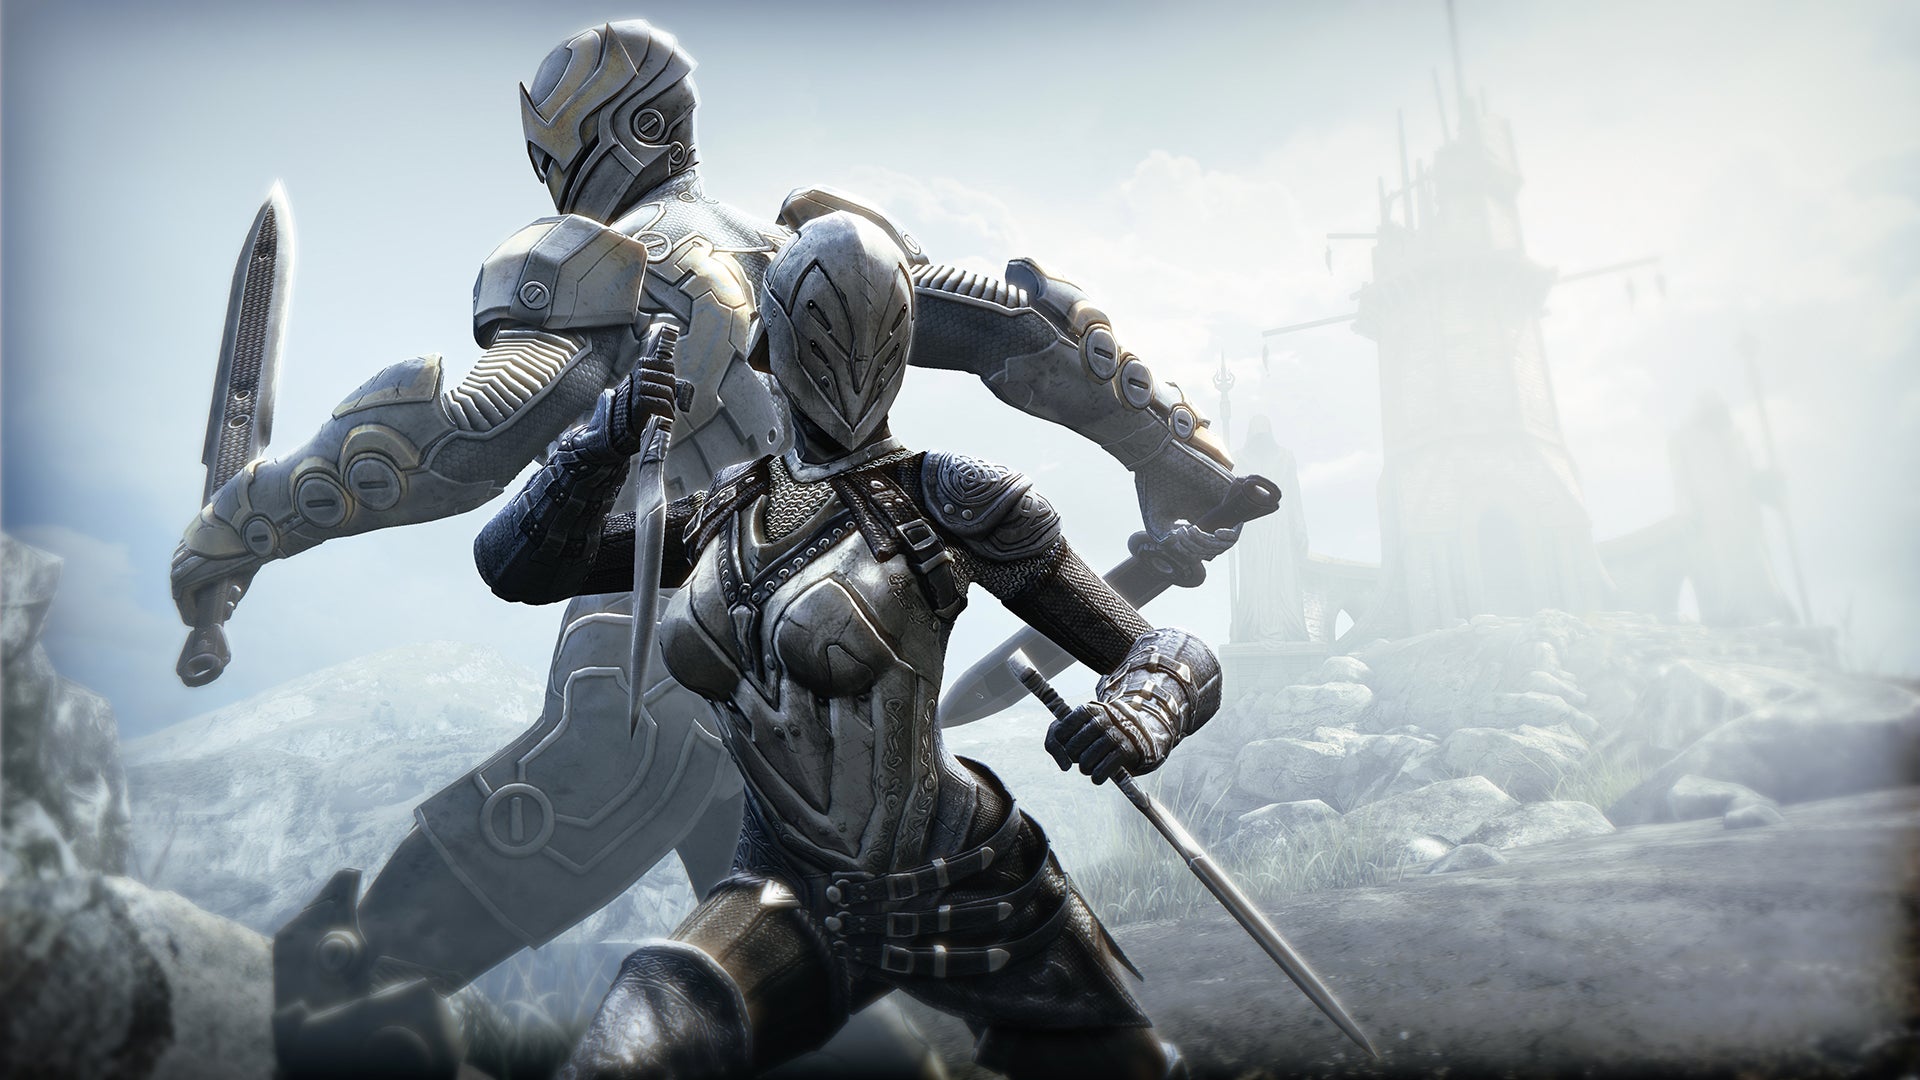 Image for In a surprise move, Epic has removed all 3 Infinity Blade games from iOS App Store